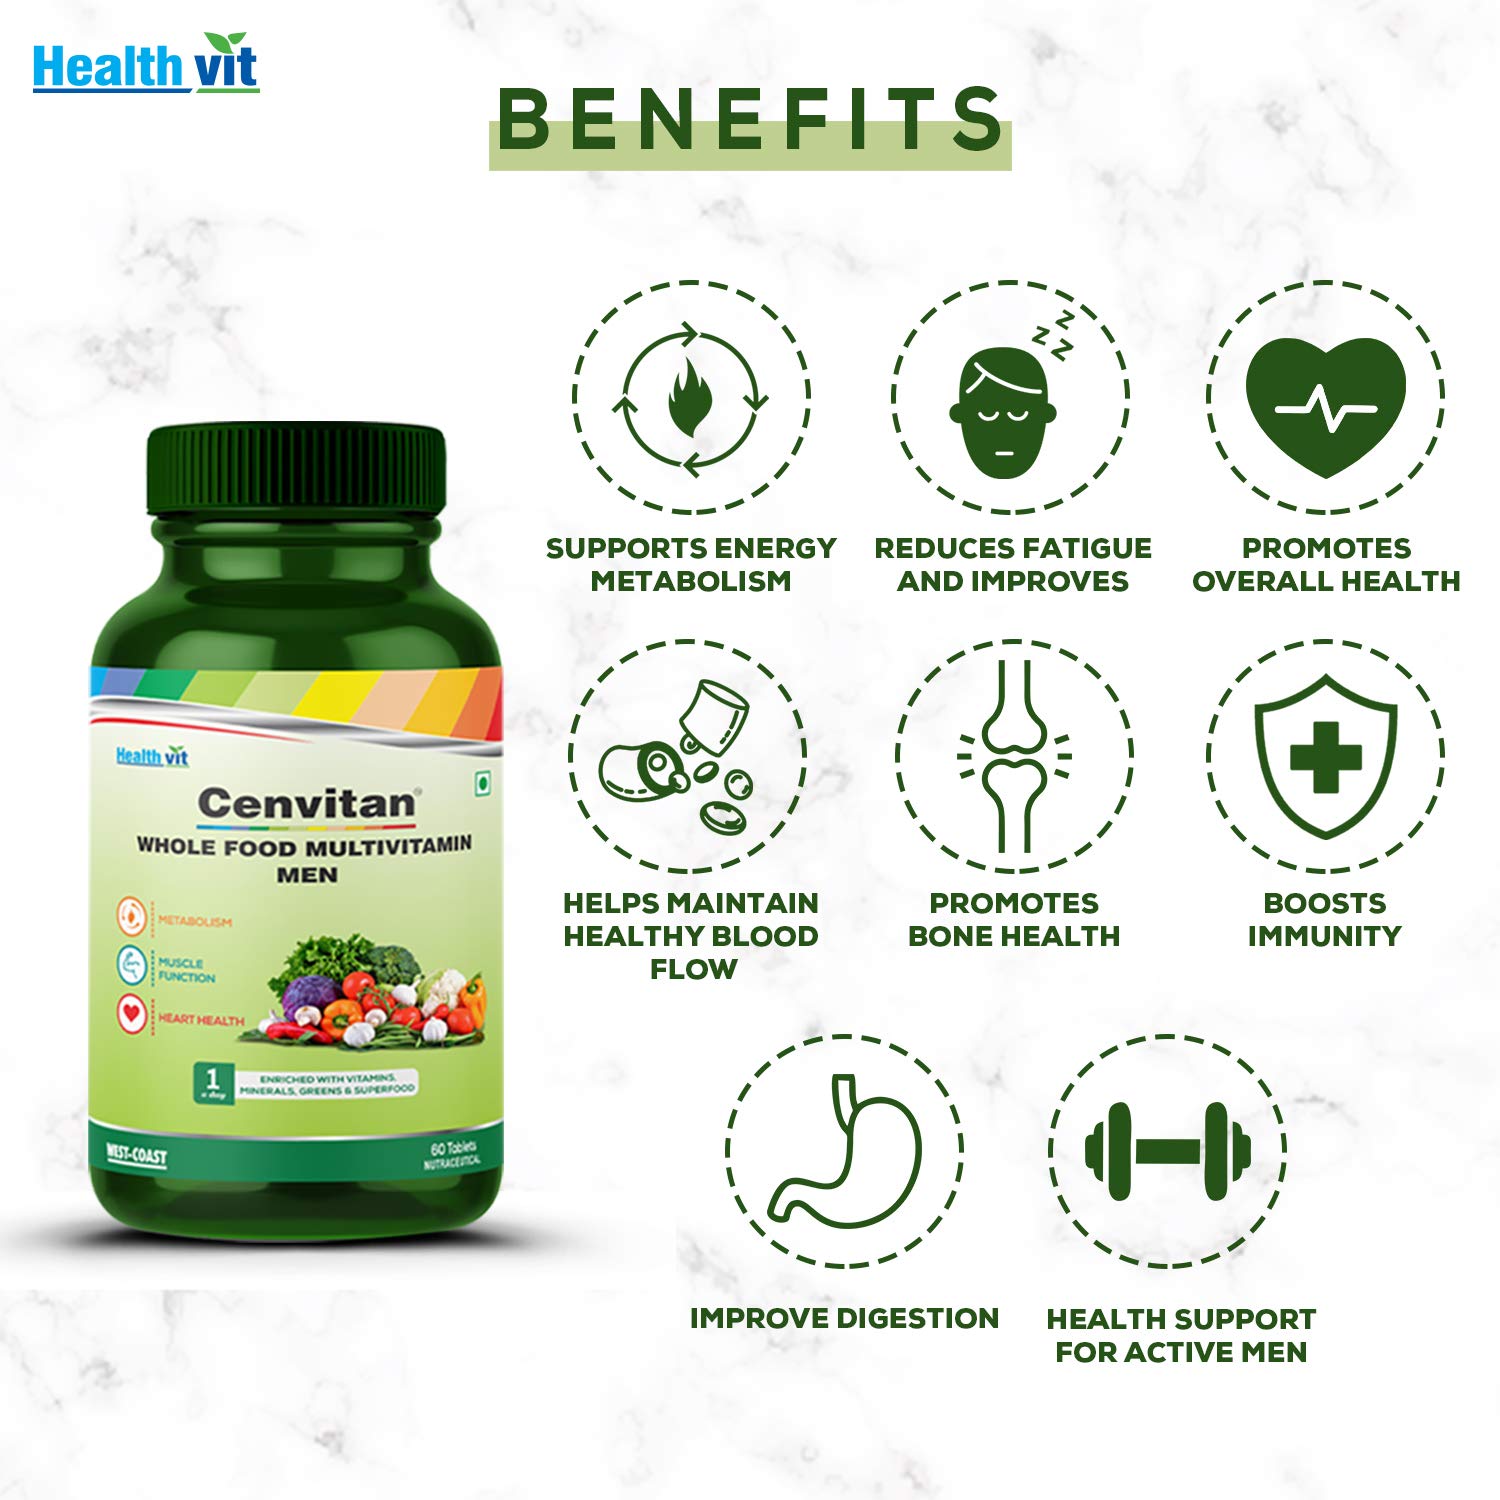 Healthvit Cenvitan Plant Based Whole Food Multivitamin for Men | Enriched with Vitamins Minerals Greens, Vegetables, Superfood, Fruits & Herbs Supplement For Immunity – 60 Tablets (Pack of 2)